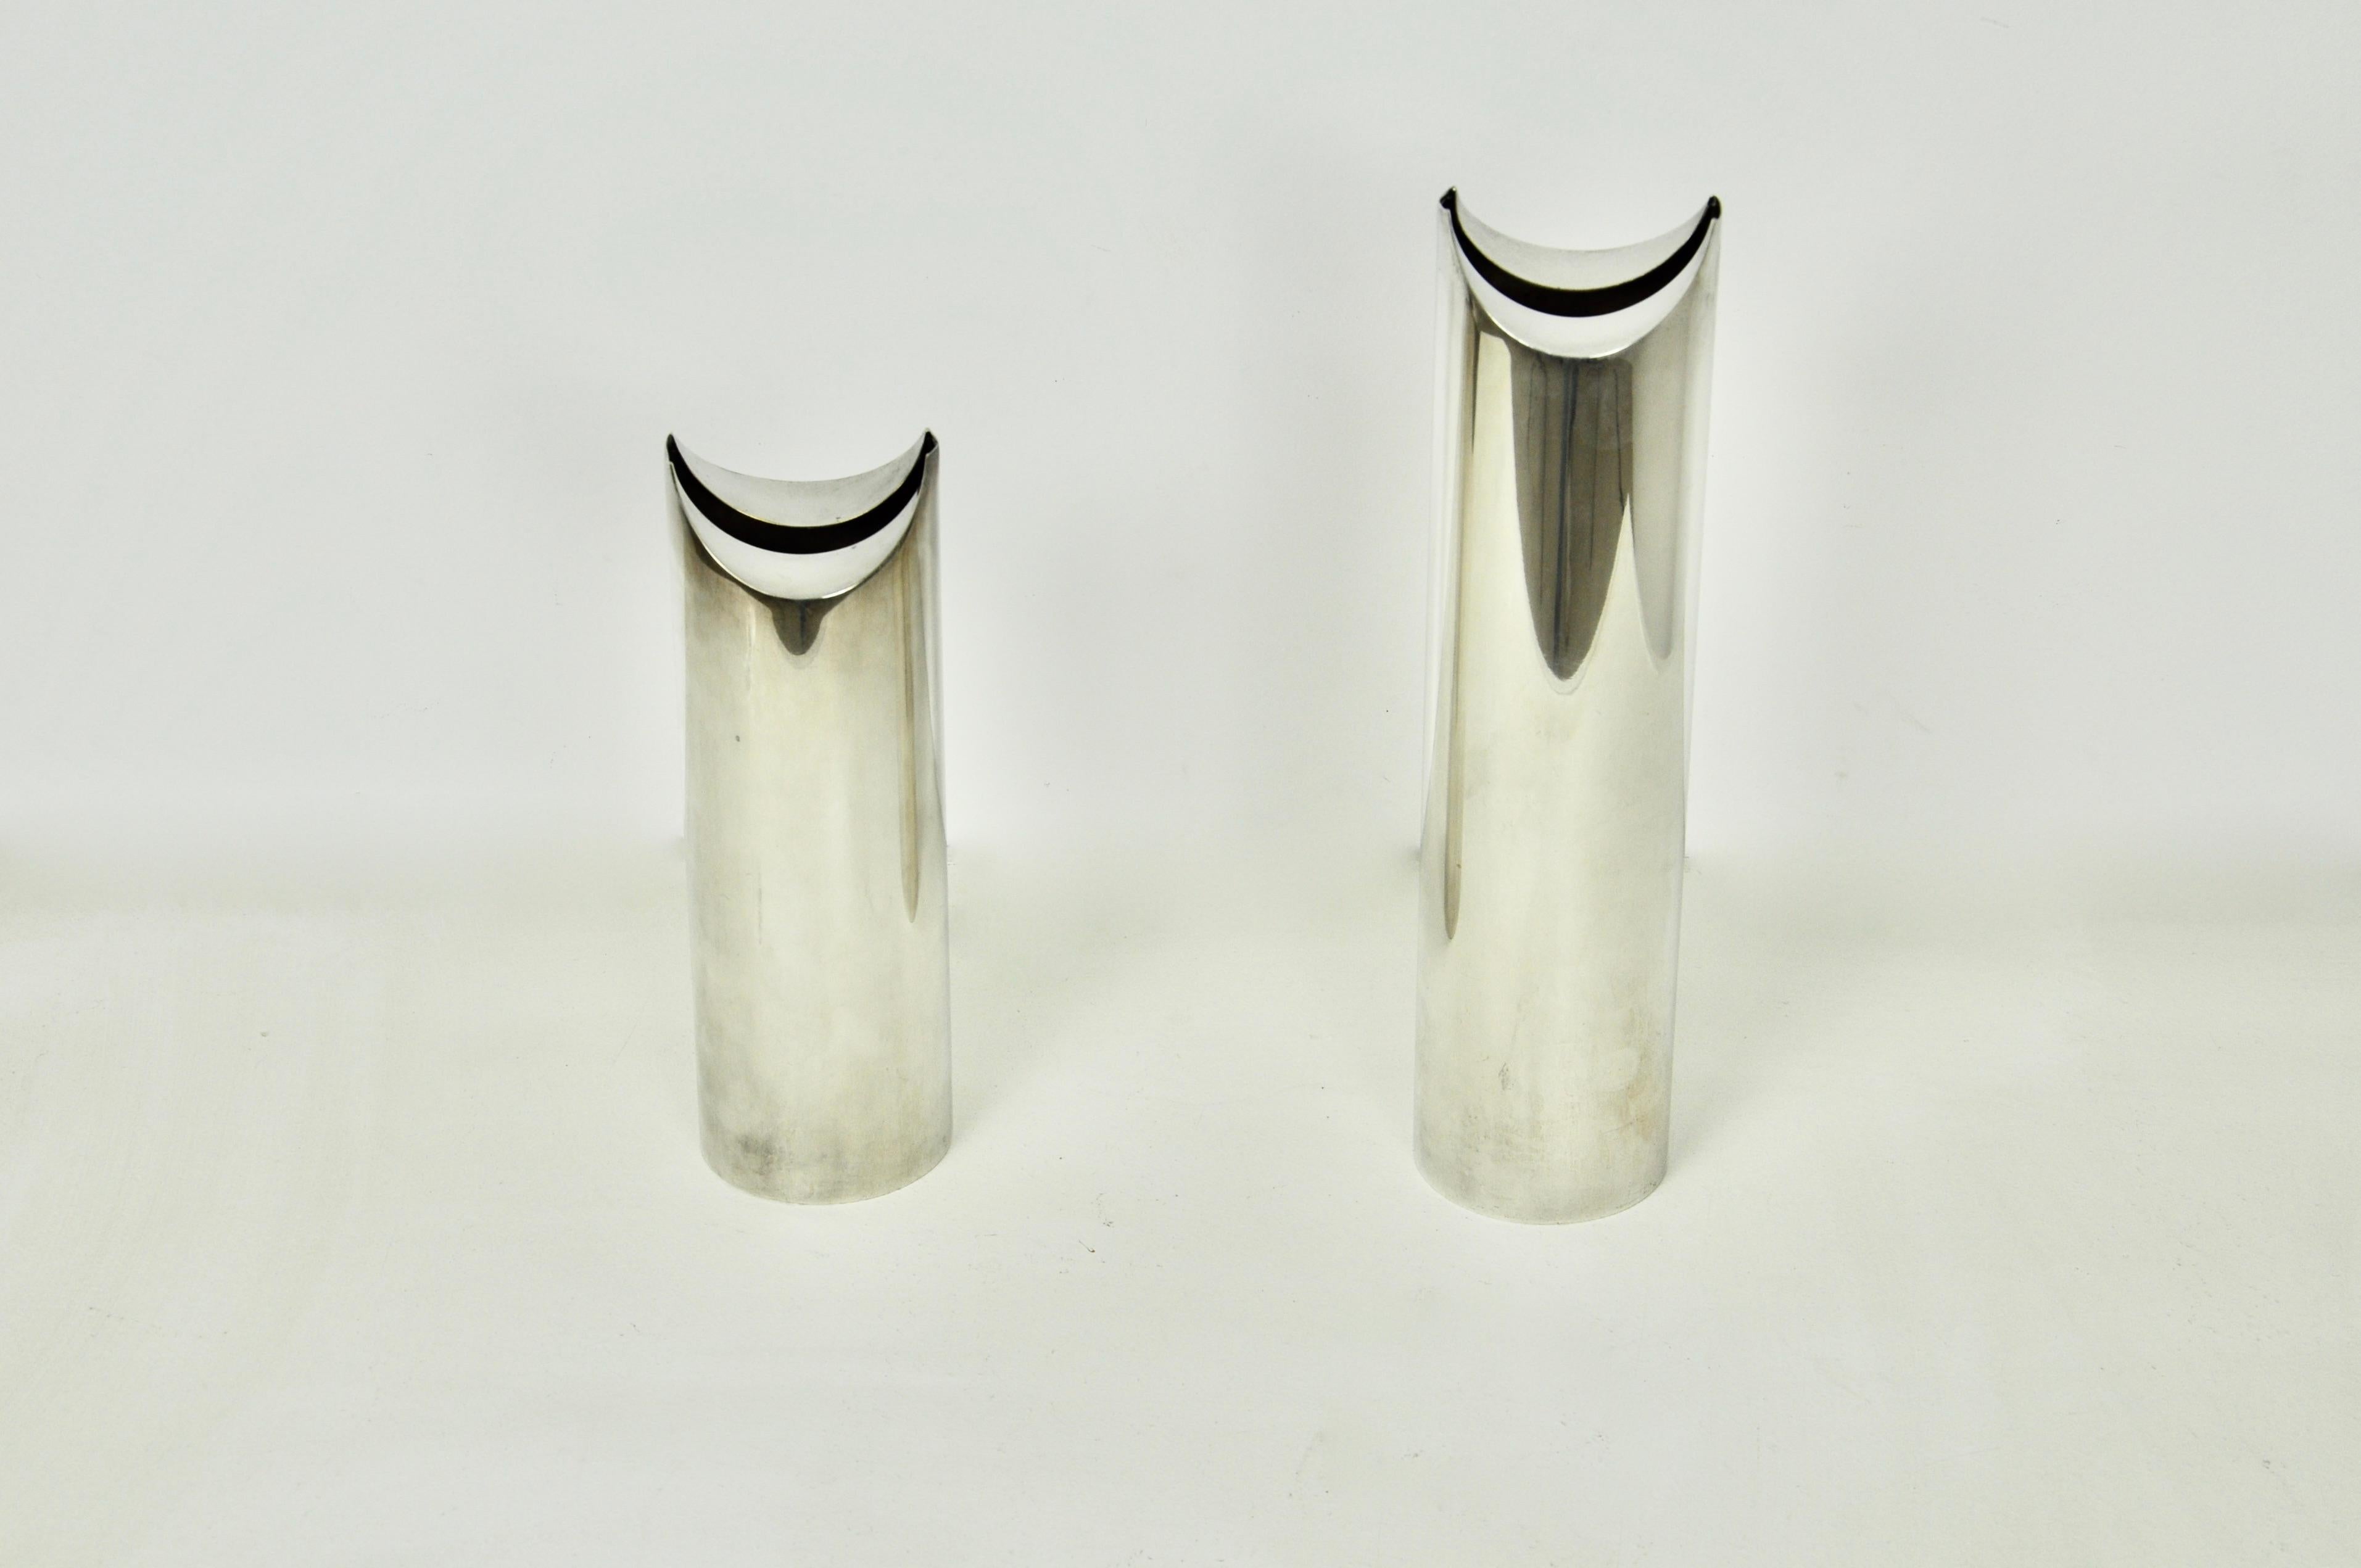 Pair of vases stamped Sabattini. Measures: Different height 36cm and 27cm. Normal patina due to time and age of the vases.